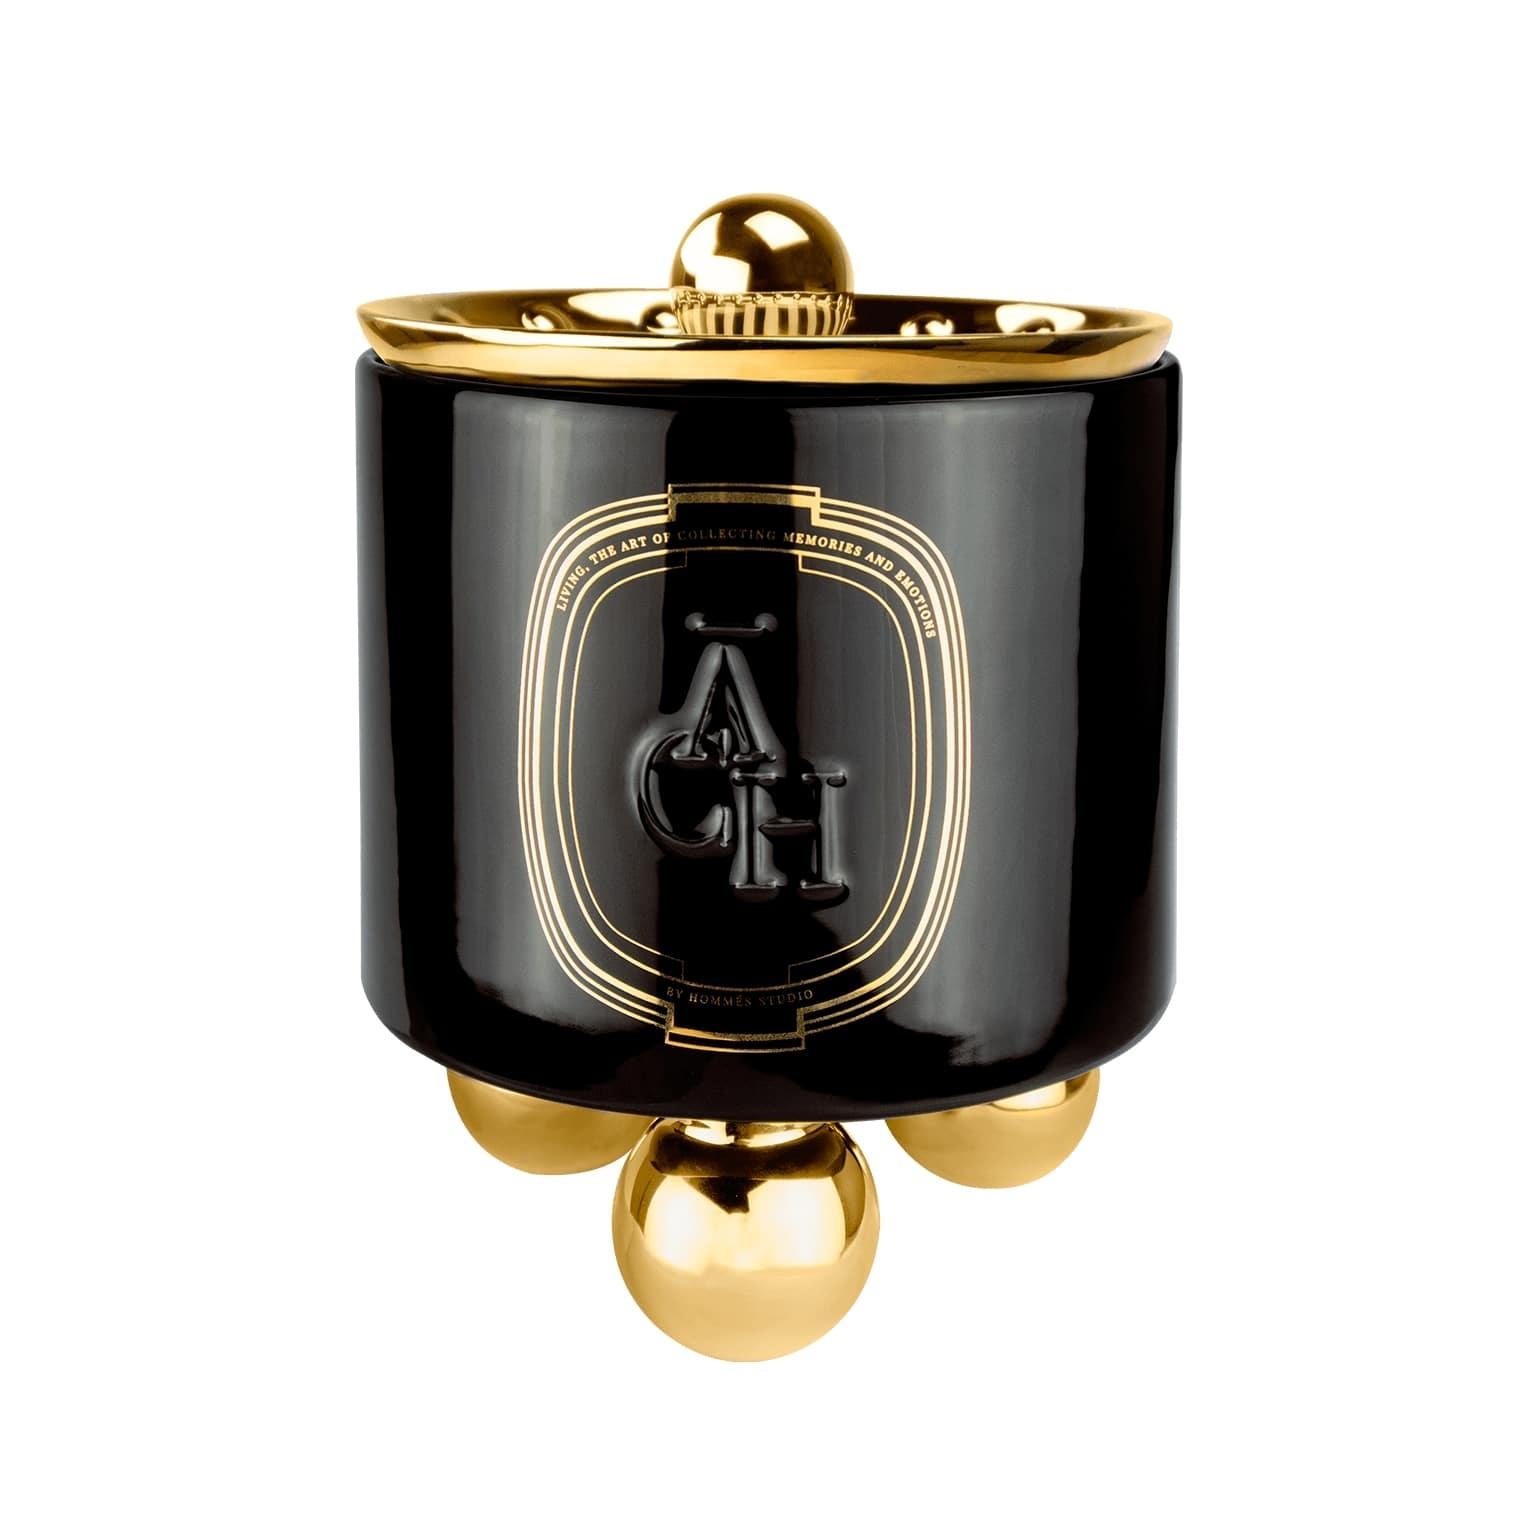 Achi candle releases a hypnotic perfume adding extra value to a space thanks to its eye-catching container design. The natural composition of scents promises to excite sensorial experiences through your home.

ACH advisors recommend you continue